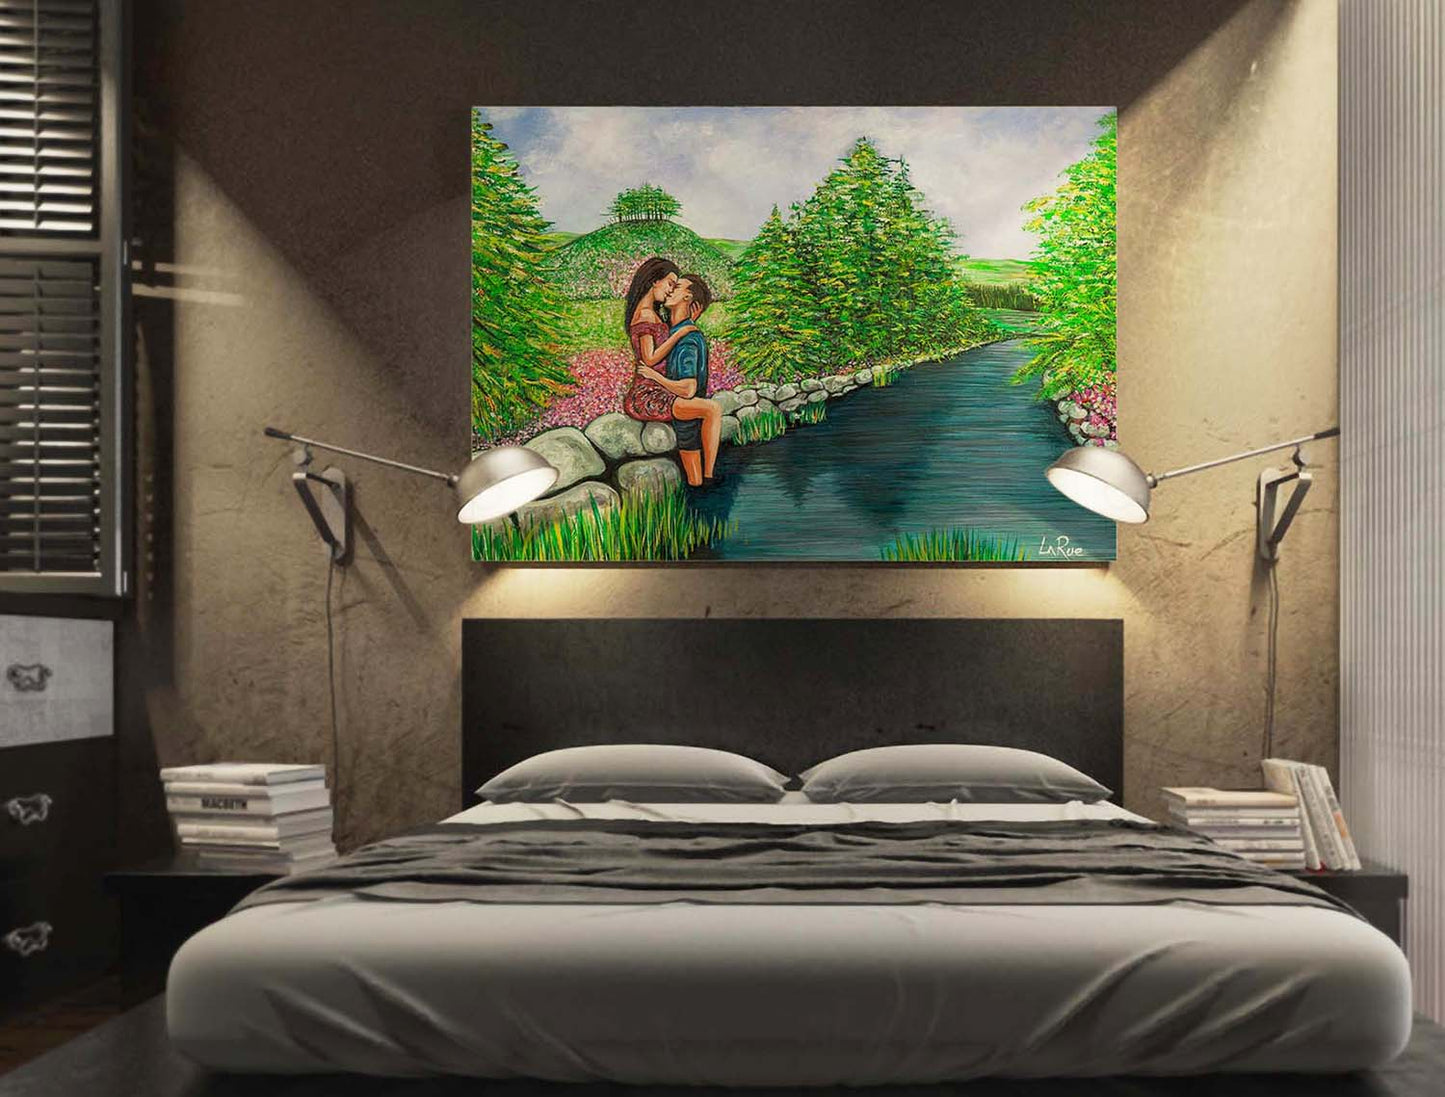 Passion Creek oil painting by Doug LaRue large print over a bed